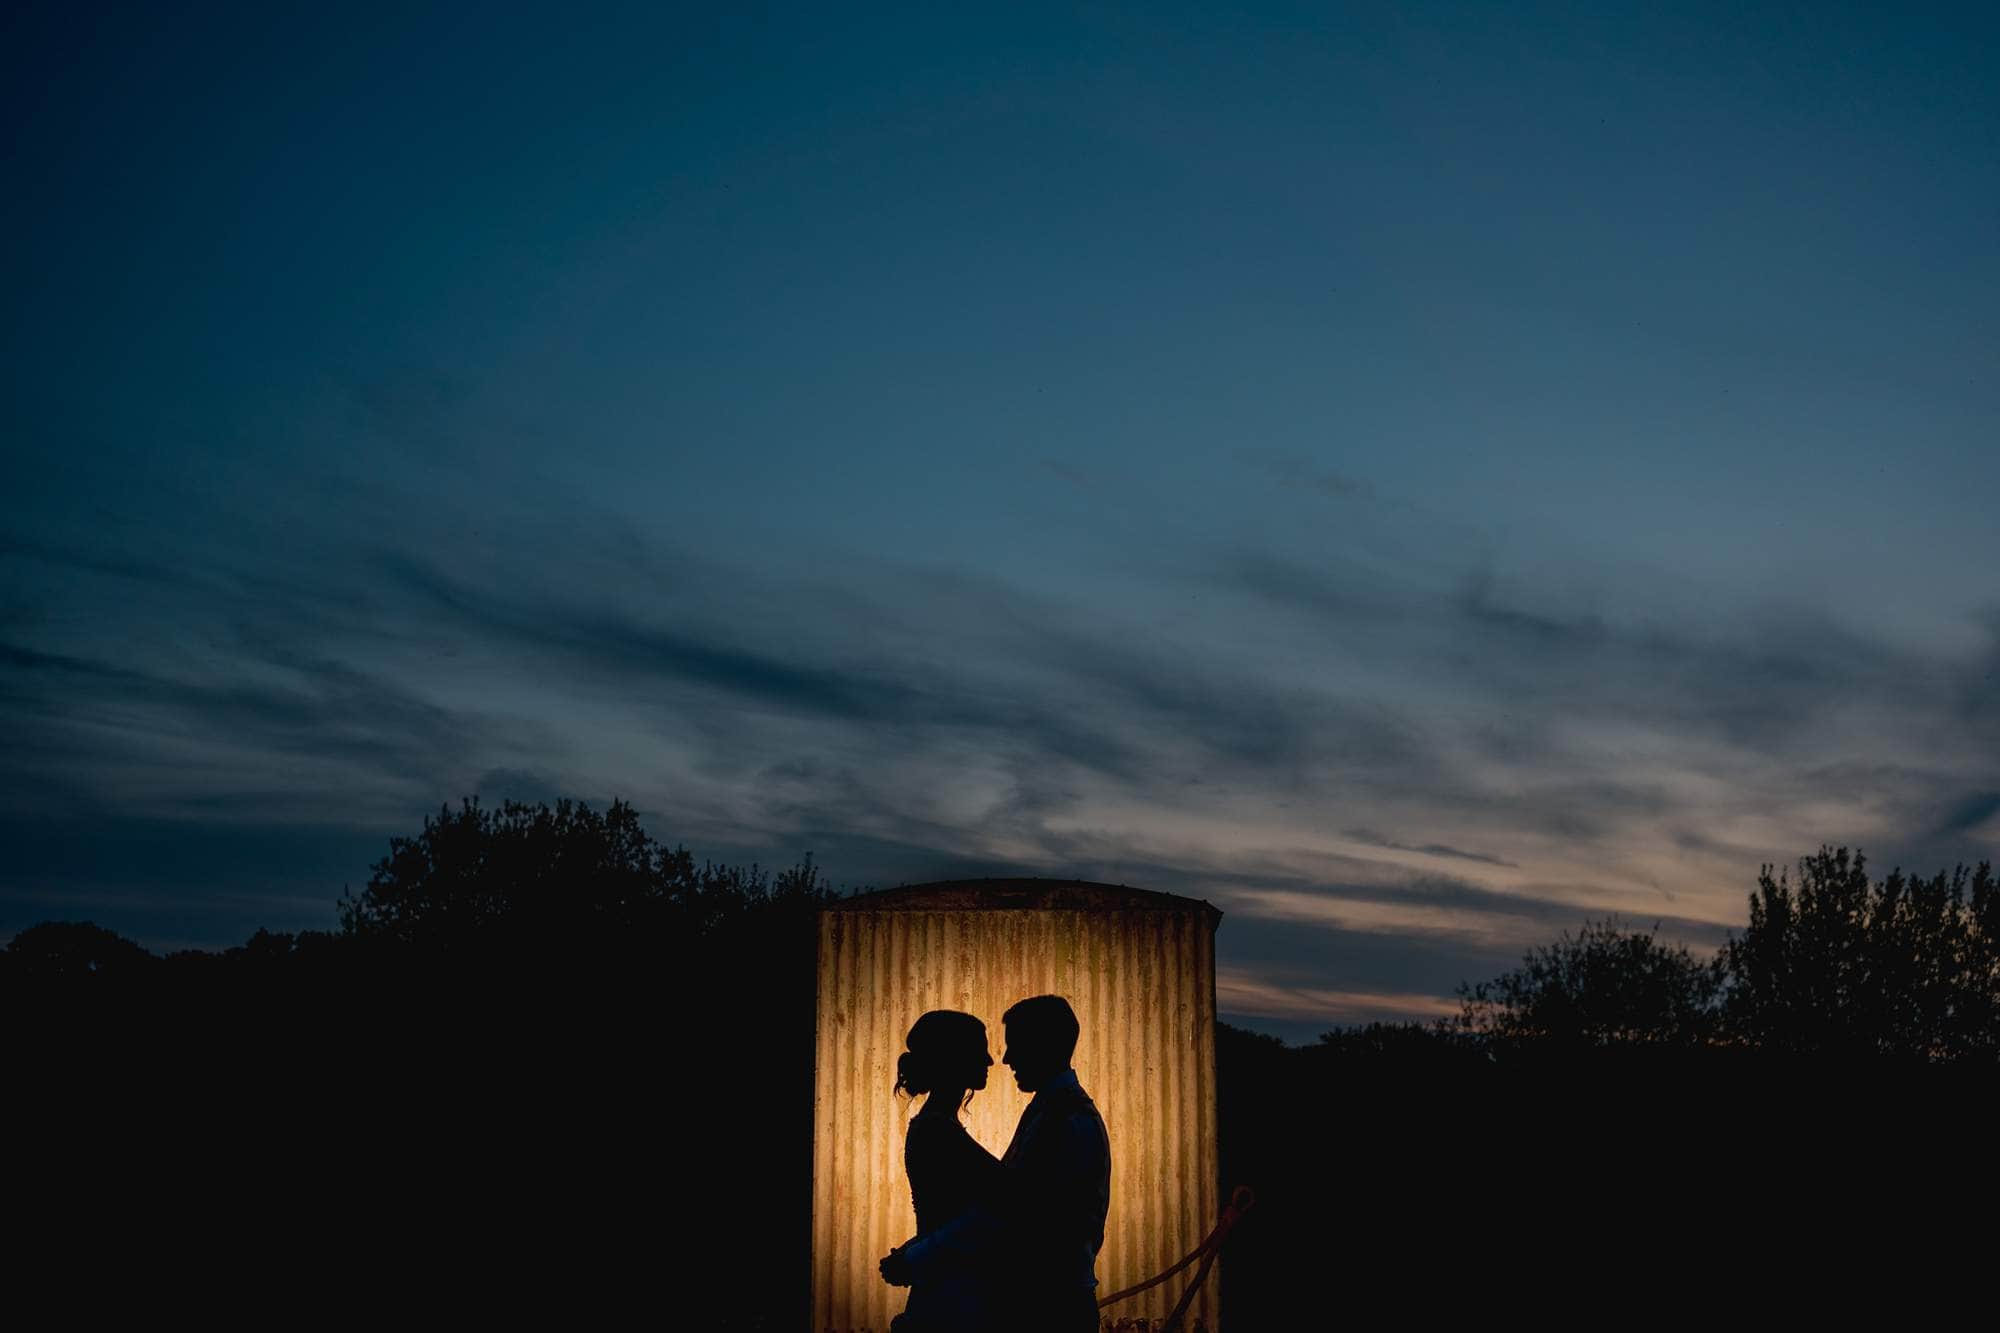 Silhouettes at old Greens Barn wedding.